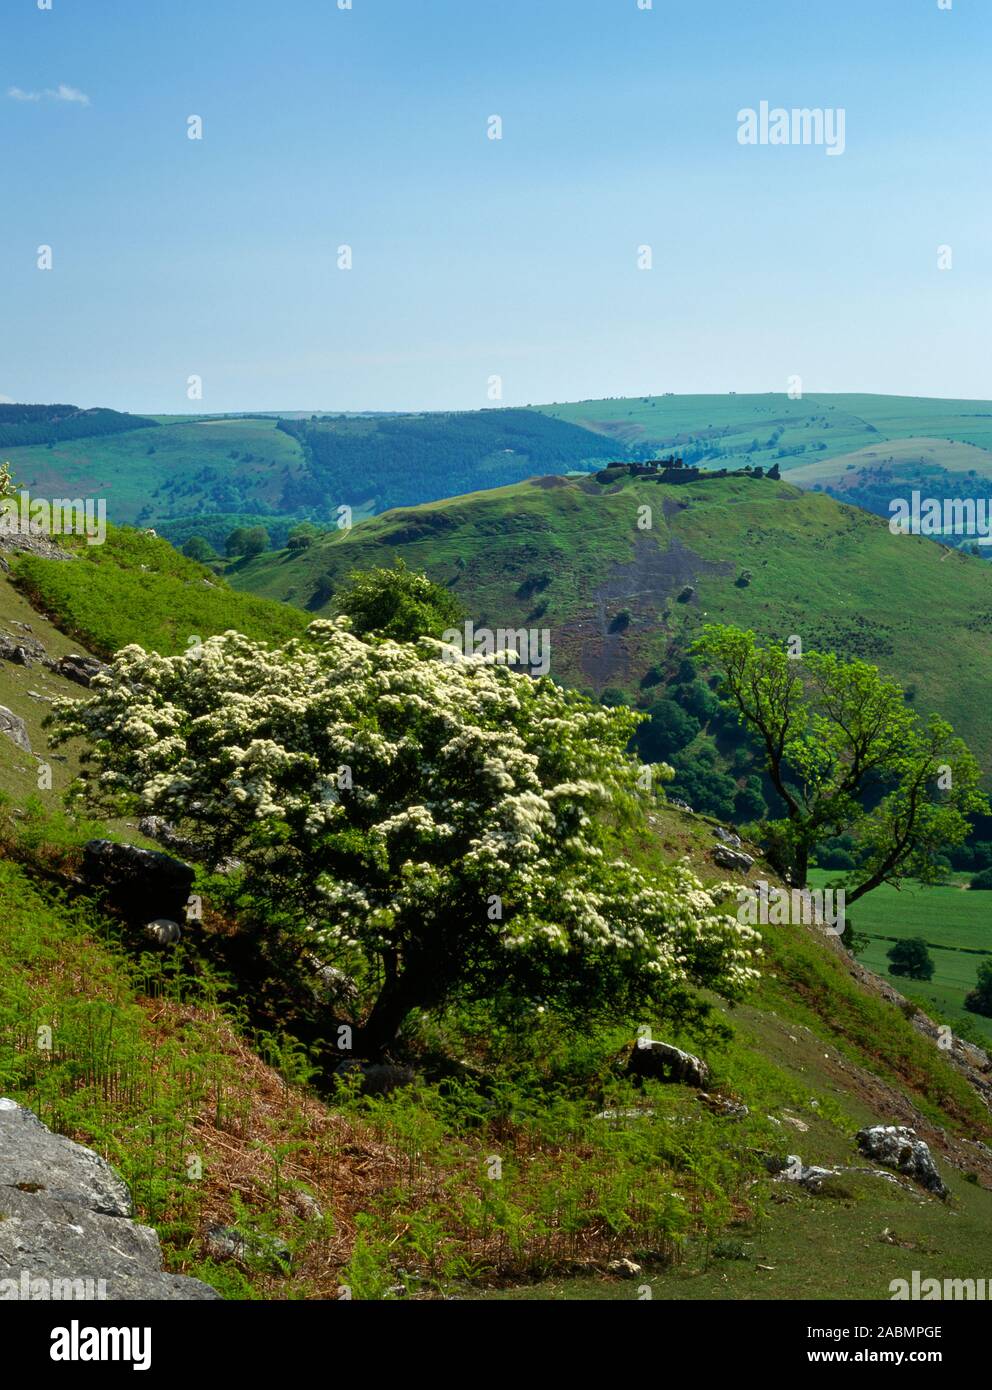 View S from Creigiau Eglwyseg looking over a hawthorn to Castell Dinas Bran Iron Age hillfort & Medieval castle in the Vale of Llangollen, Wales, UK. Stock Photo